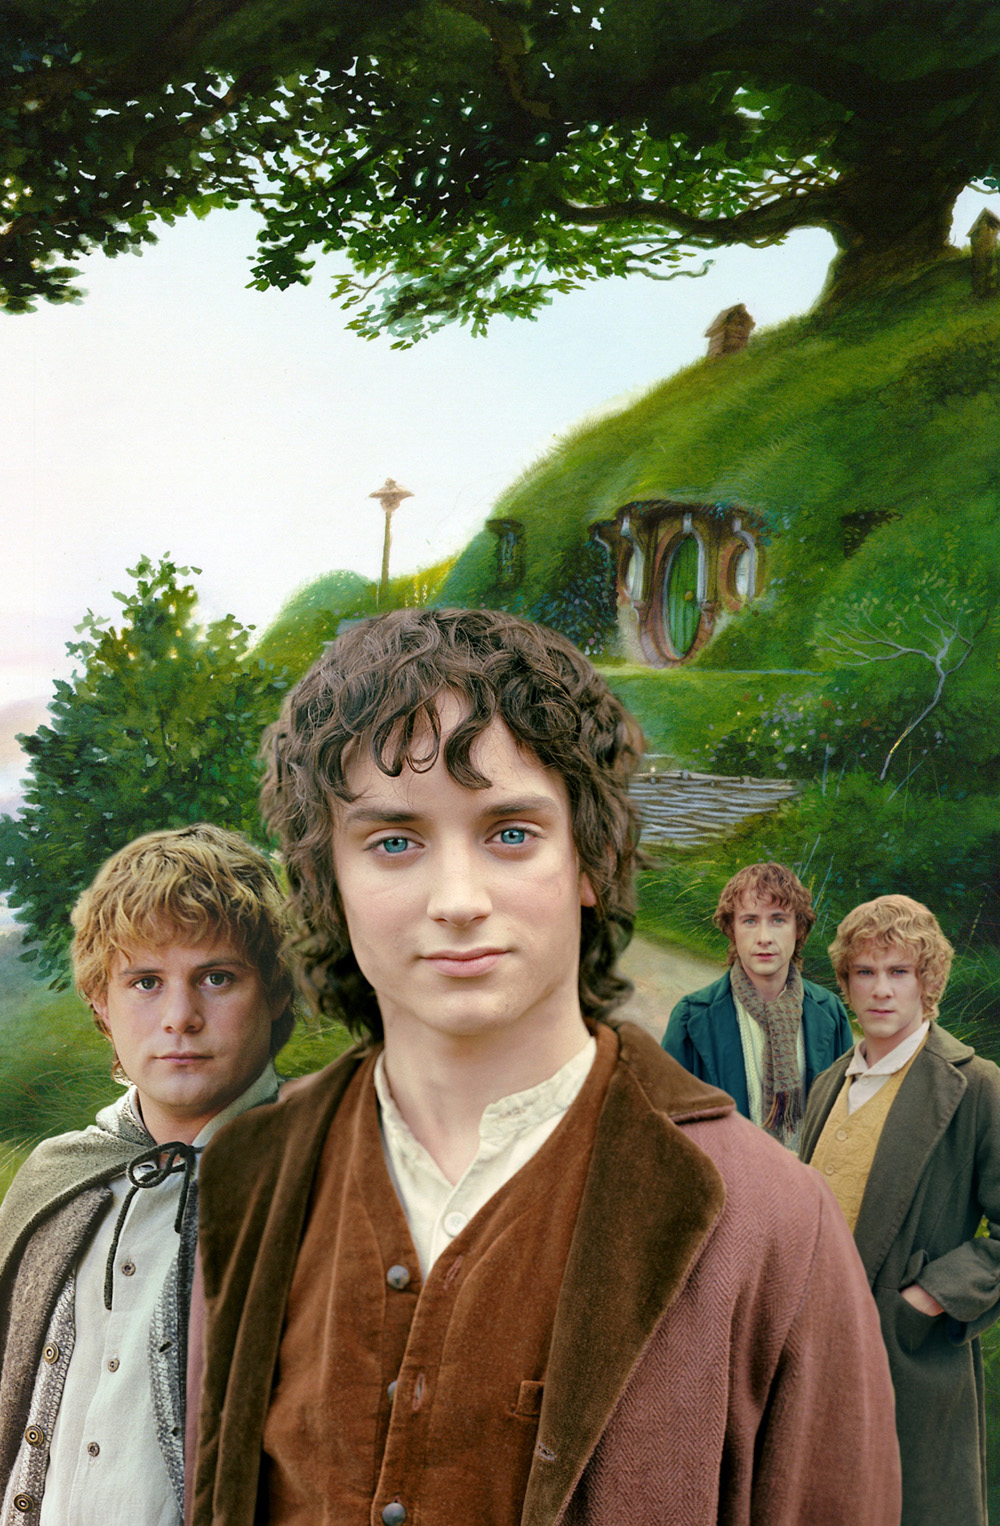 12 of the best scenes in The Lord of the Rings